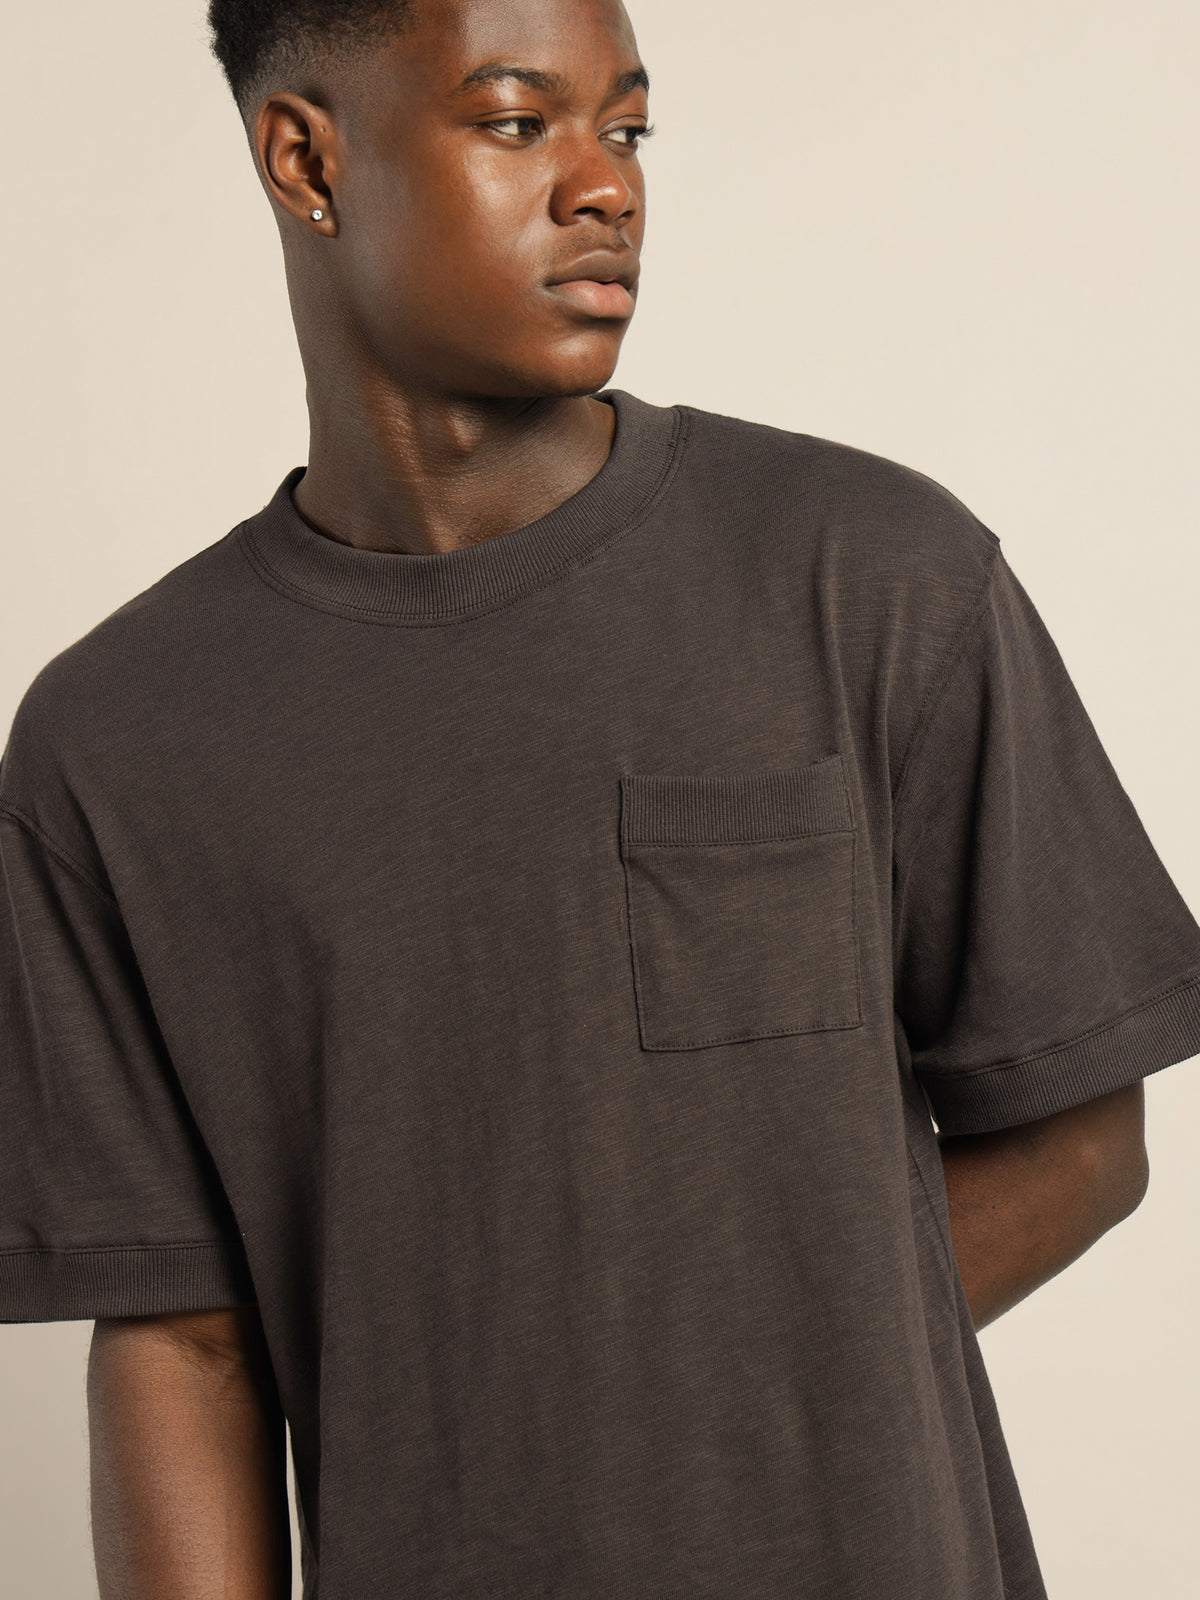 Vintage Ribbed T-Shirt in Coal Grey